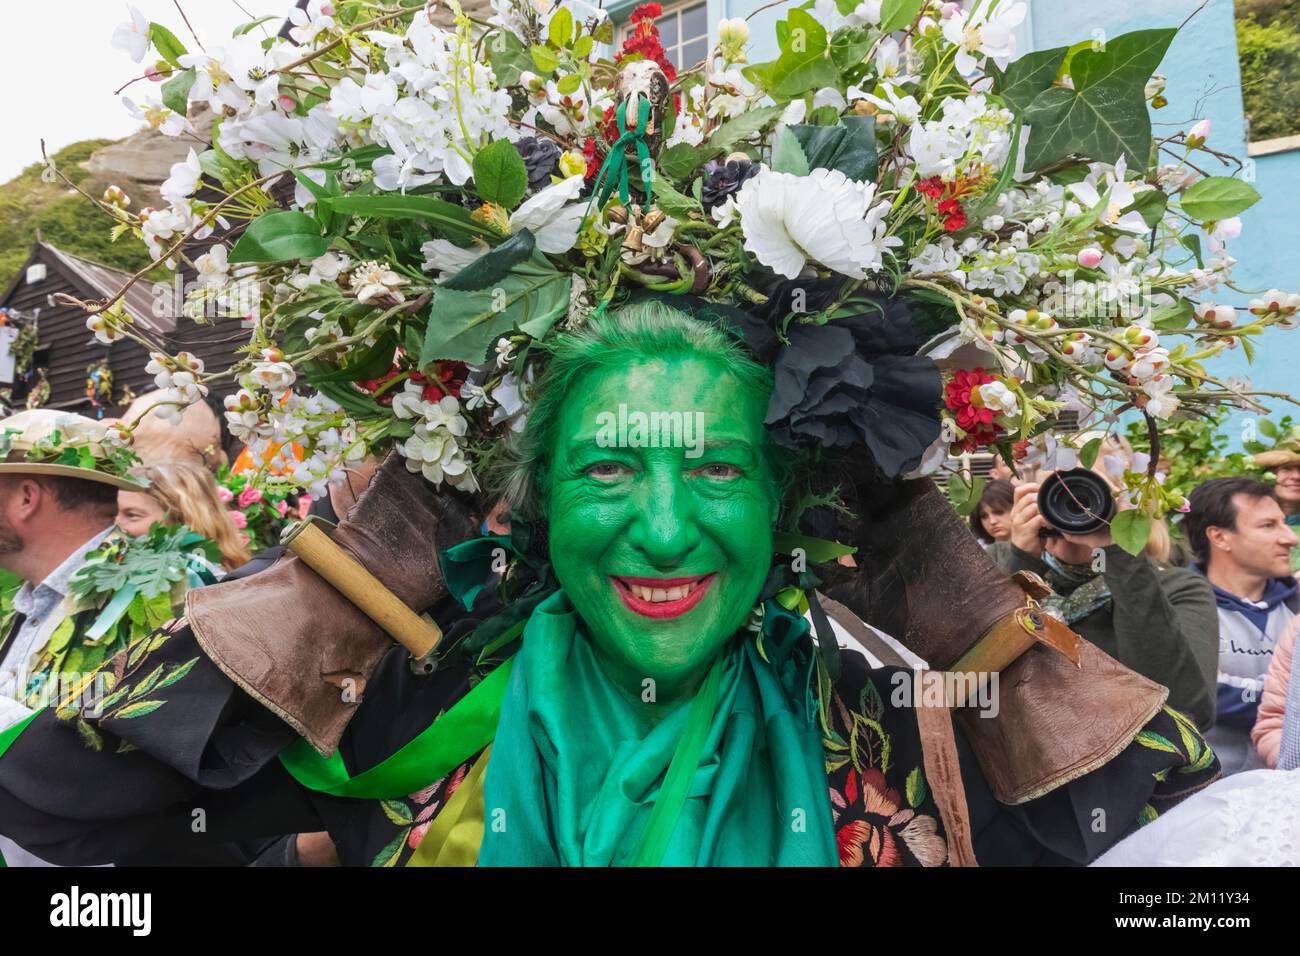 England, East Sussex, Hastings, The Annual Jack in the Green Festival, Teilnehmer an der Jack in the Green Parade Stockfoto